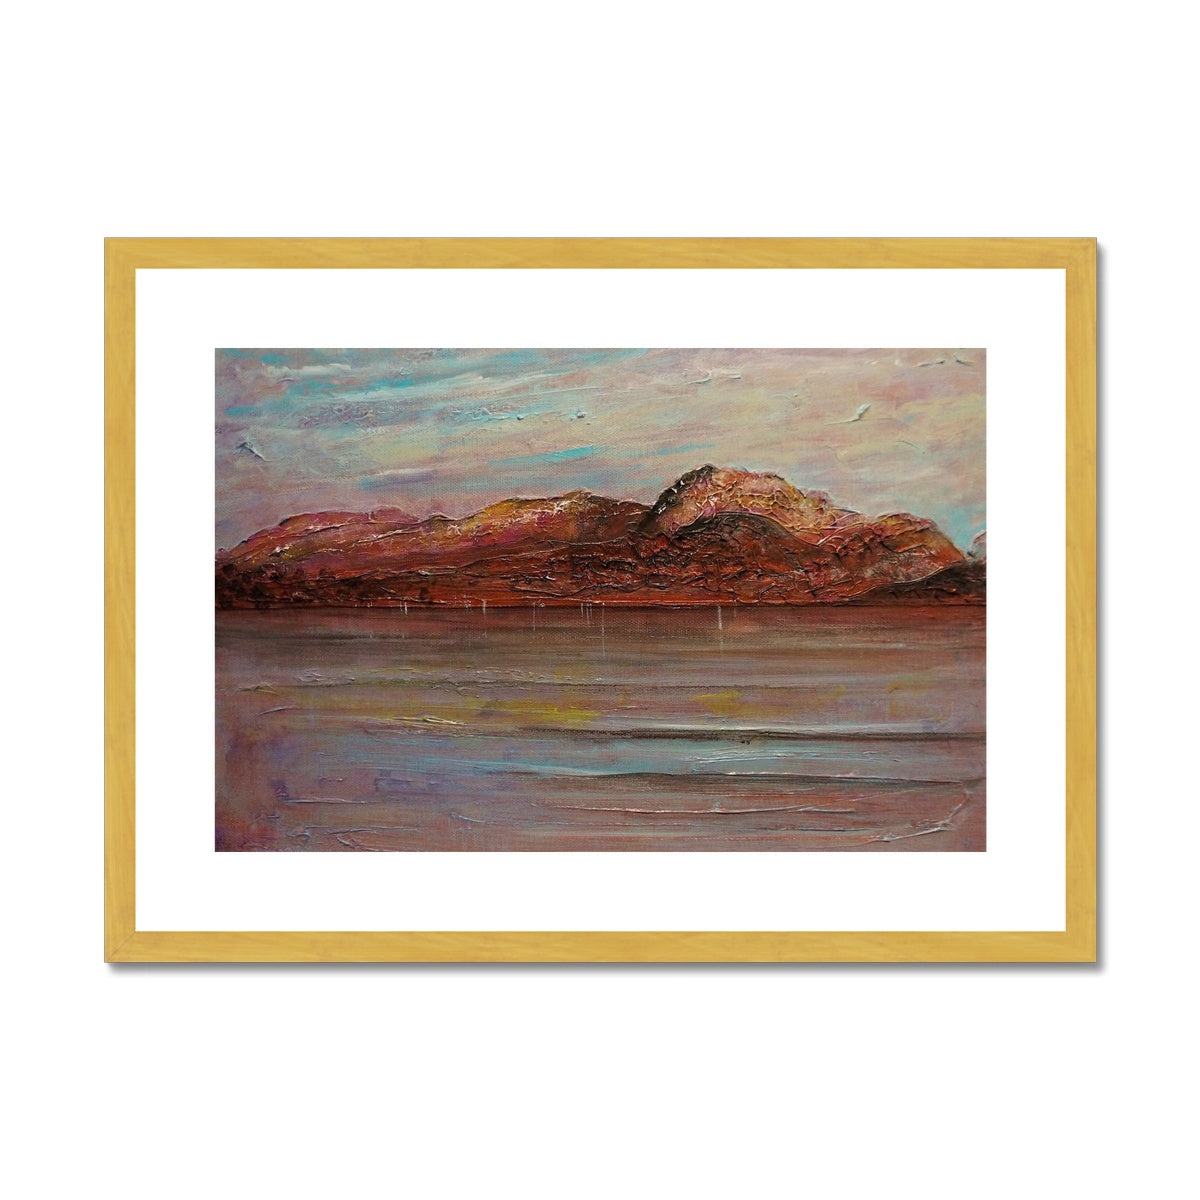 Ben Nevis Painting | Antique Framed & Mounted Prints From Scotland-Antique Framed & Mounted Prints-Scottish Lochs & Mountains Art Gallery-A2 Landscape-Gold Frame-Paintings, Prints, Homeware, Art Gifts From Scotland By Scottish Artist Kevin Hunter